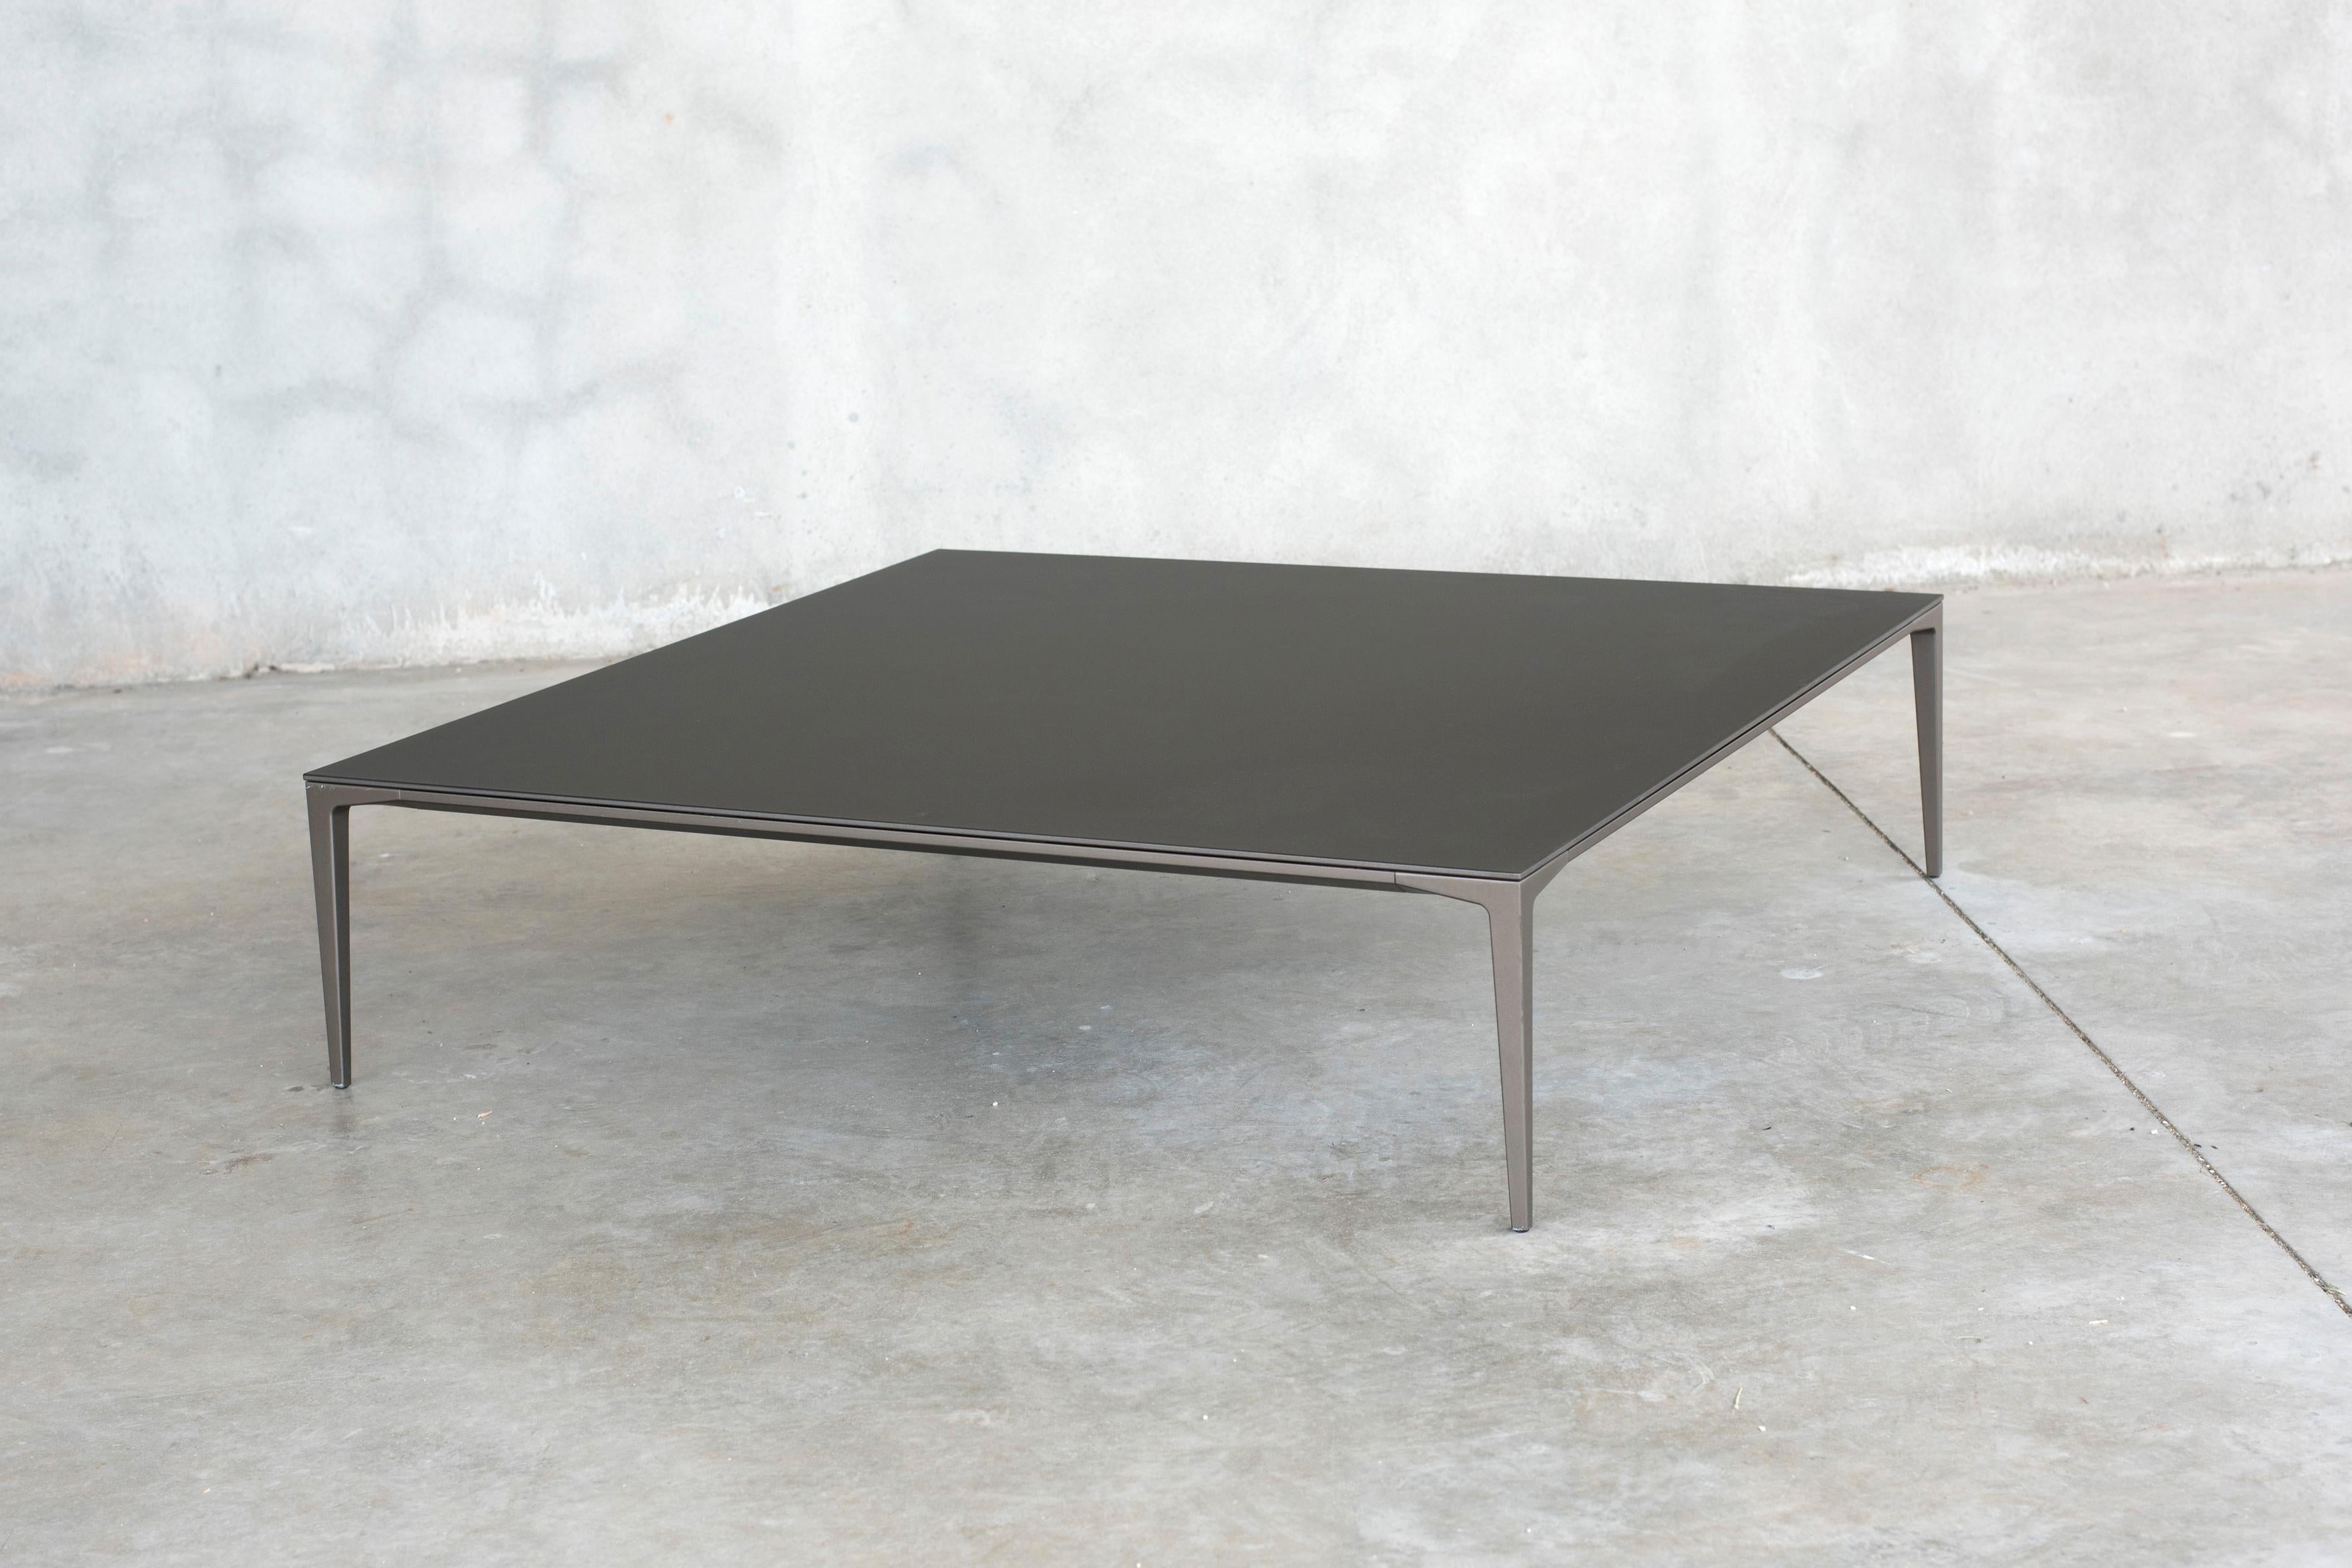 Tray Model Coffee table by Rimadesio made in 2020s.
Size 110 x 110 cm, H 28 cm / 43.3 x 43.3 inches, H 11 inches.
Pre-owned but on excellent conditions.
Dark aluminium legs structure and black carbon color top.
A video is available upon request.
 